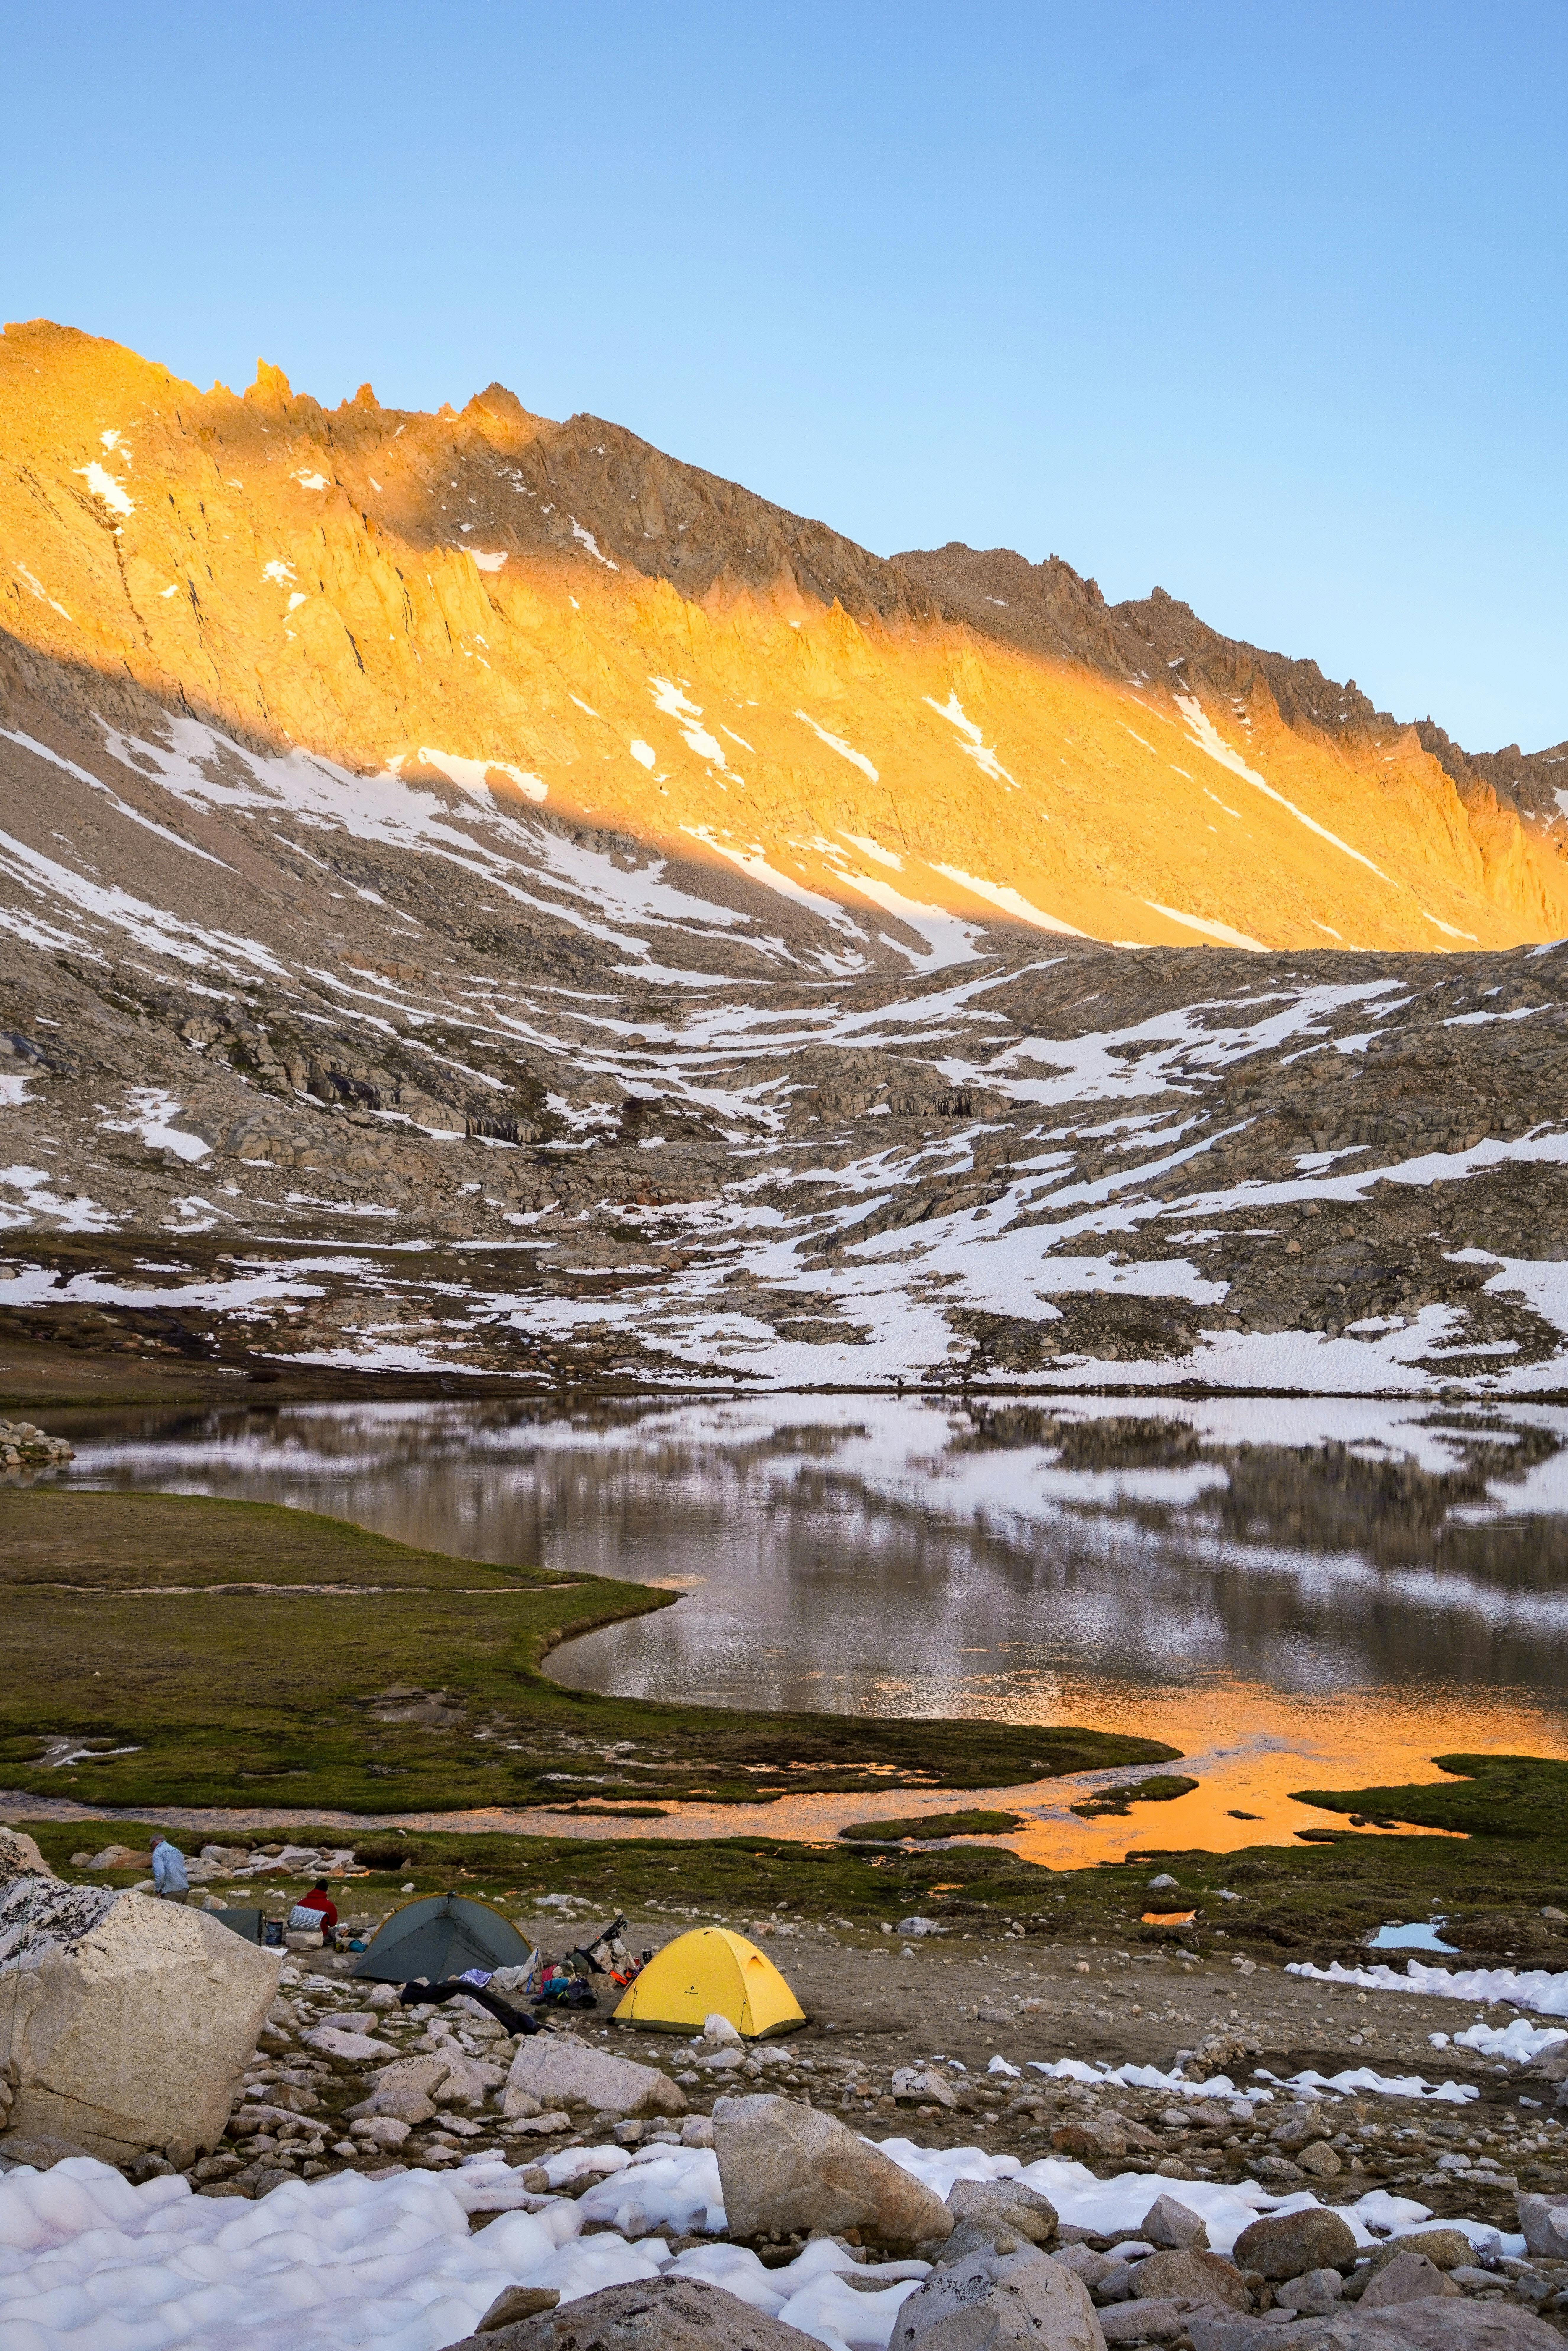 Two small tents are in the bottom of the image, on the shore of a lake that is reflecting the yellow sunset light shining on the jagged, snow-dusted peaks above. 